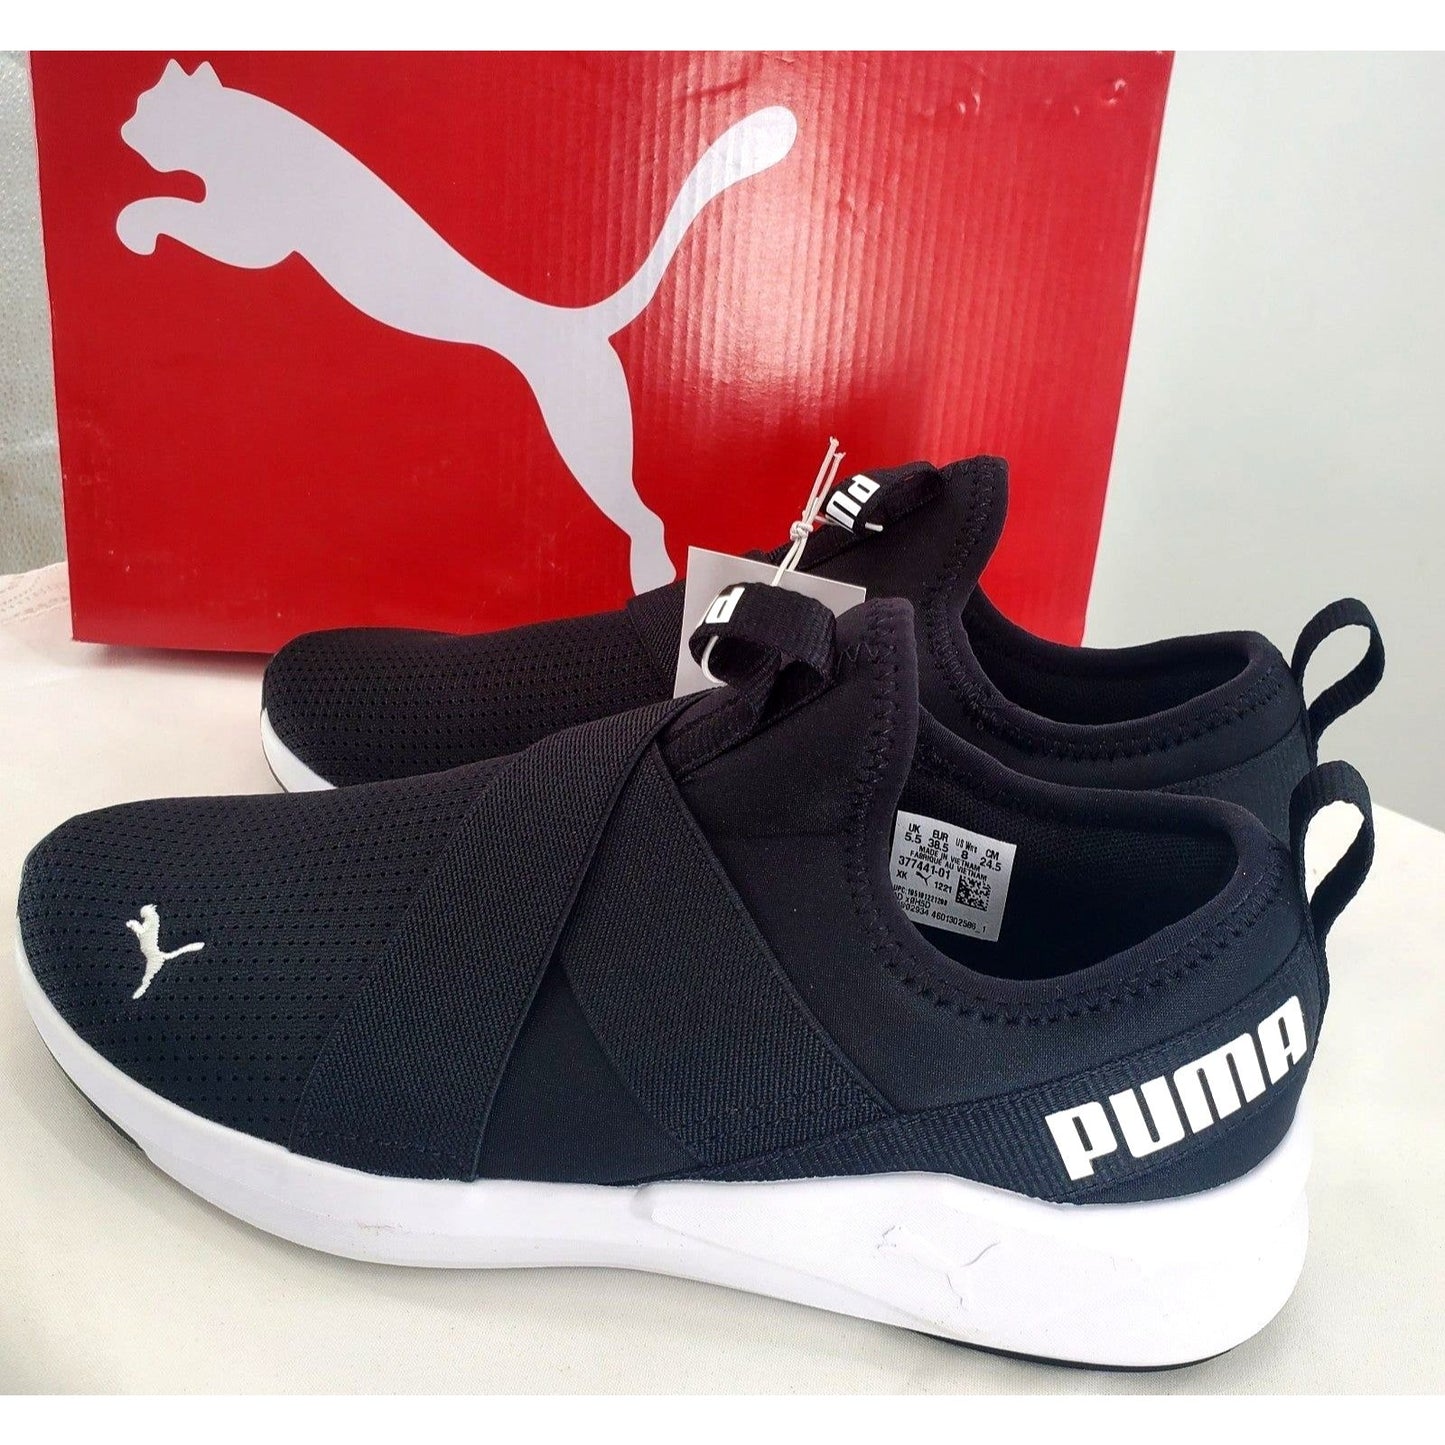 PUMA Sneakers Women's Chroma Prowl Activewear Slip-On Athletic Shoes